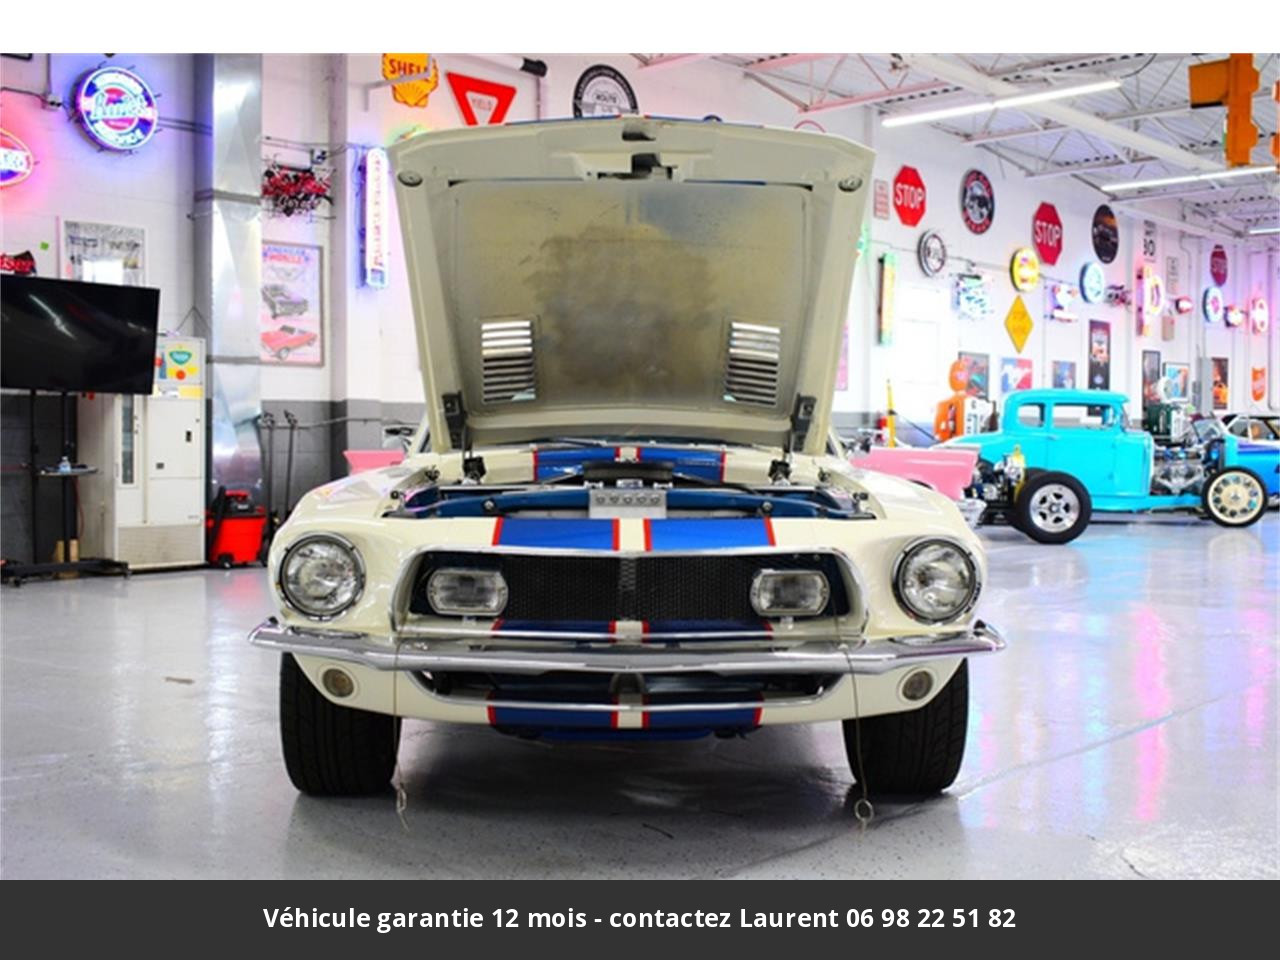 Ford Mustang Gt500 signée carroll shelby n° 1416 cobra le mans 390 ci  s code matching 1968 prix tout compris